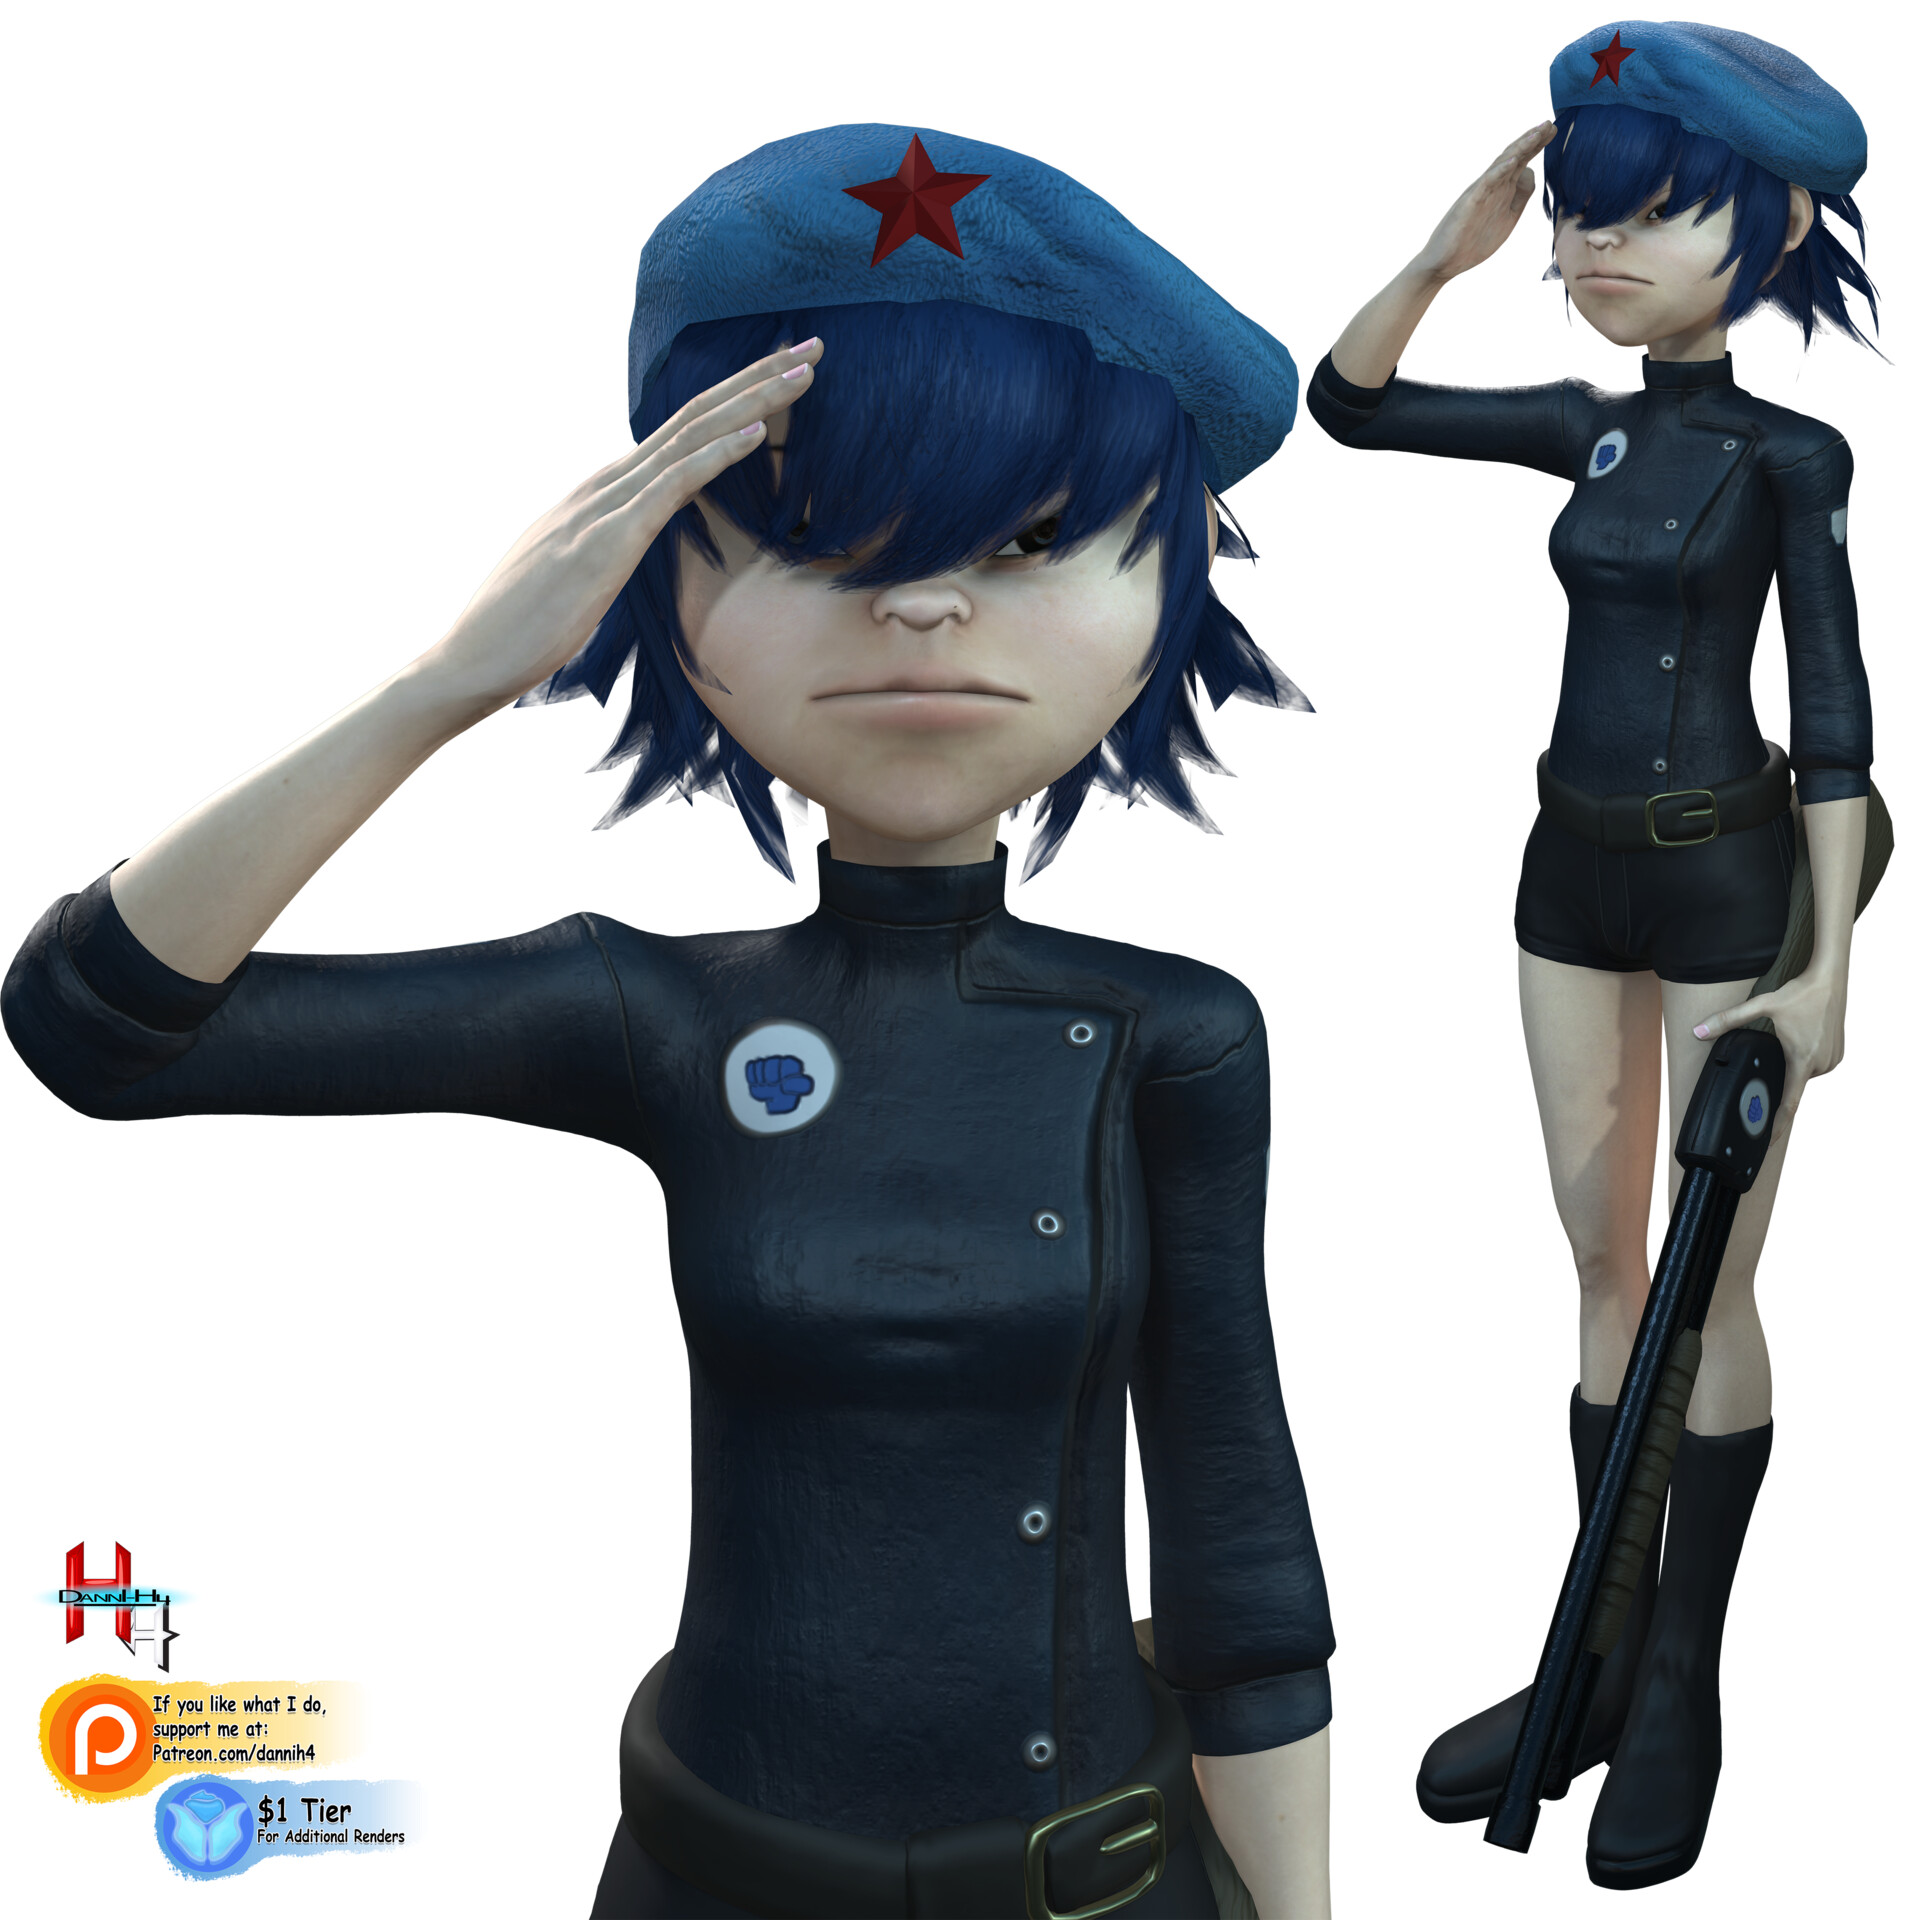 Working on Cyborg Noodle from Gorillaz. 